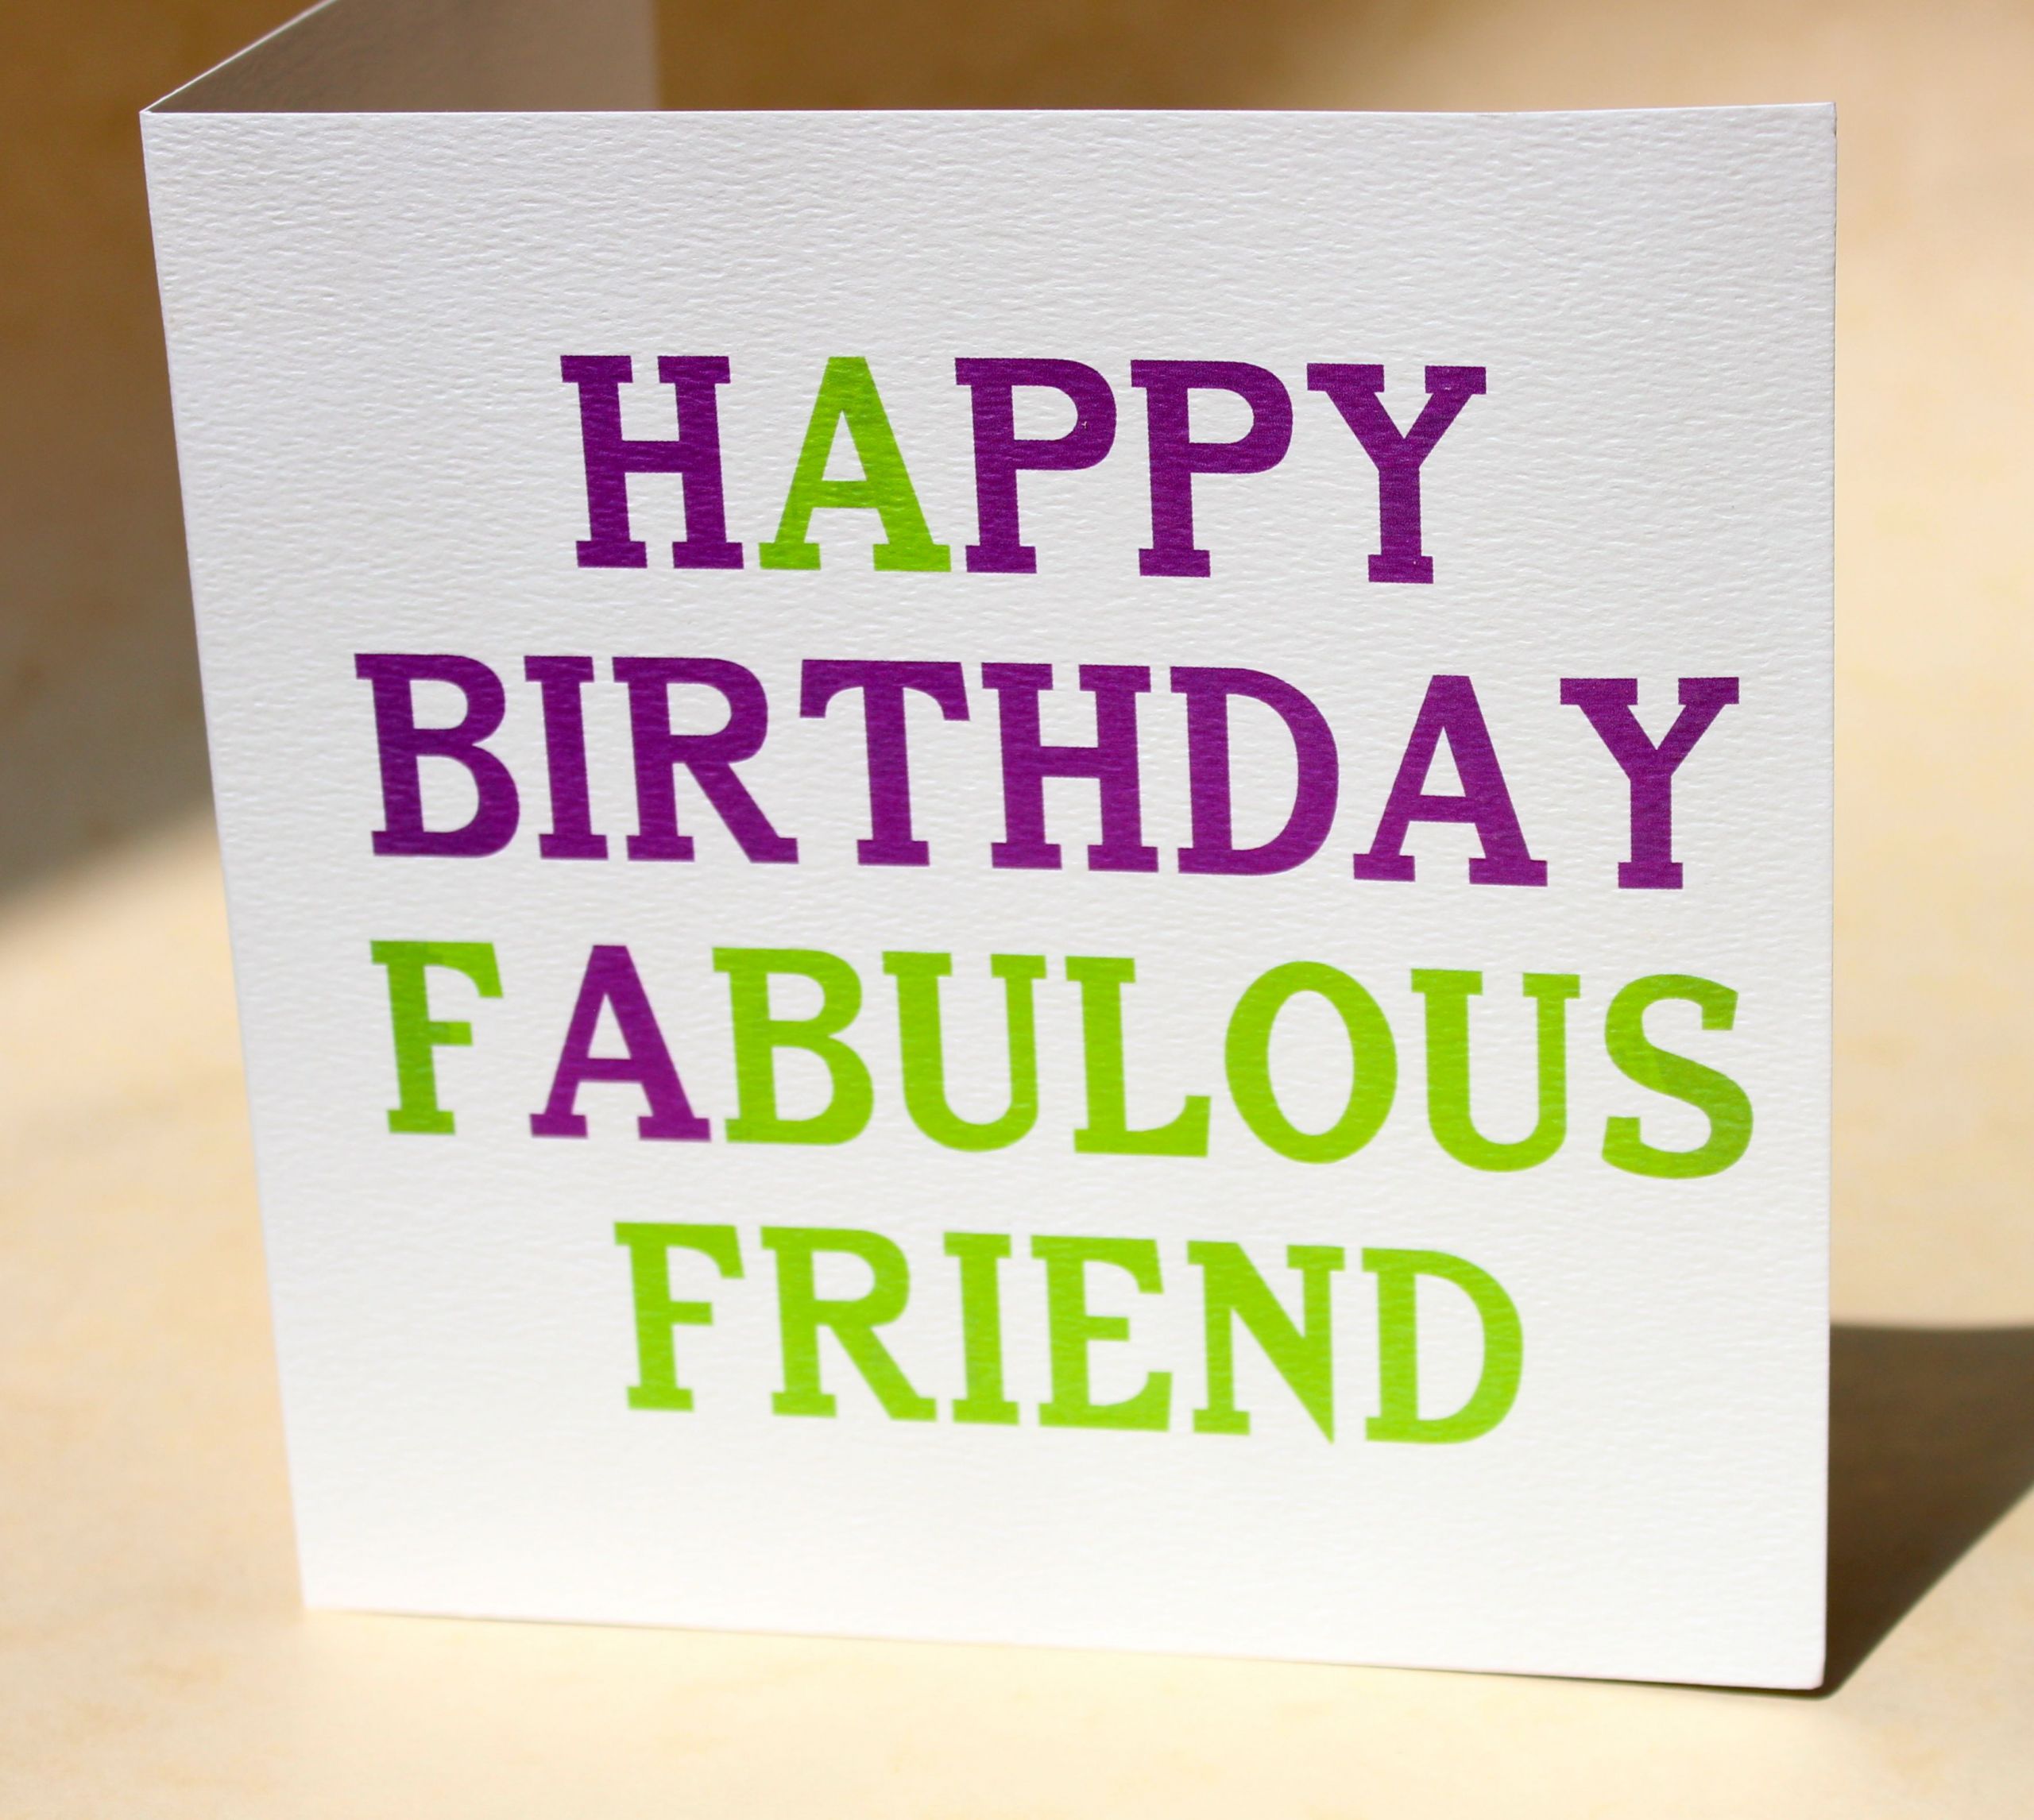 Happy Birthday Friend Images With Quotes
 Happy birthday friends quotes pictures